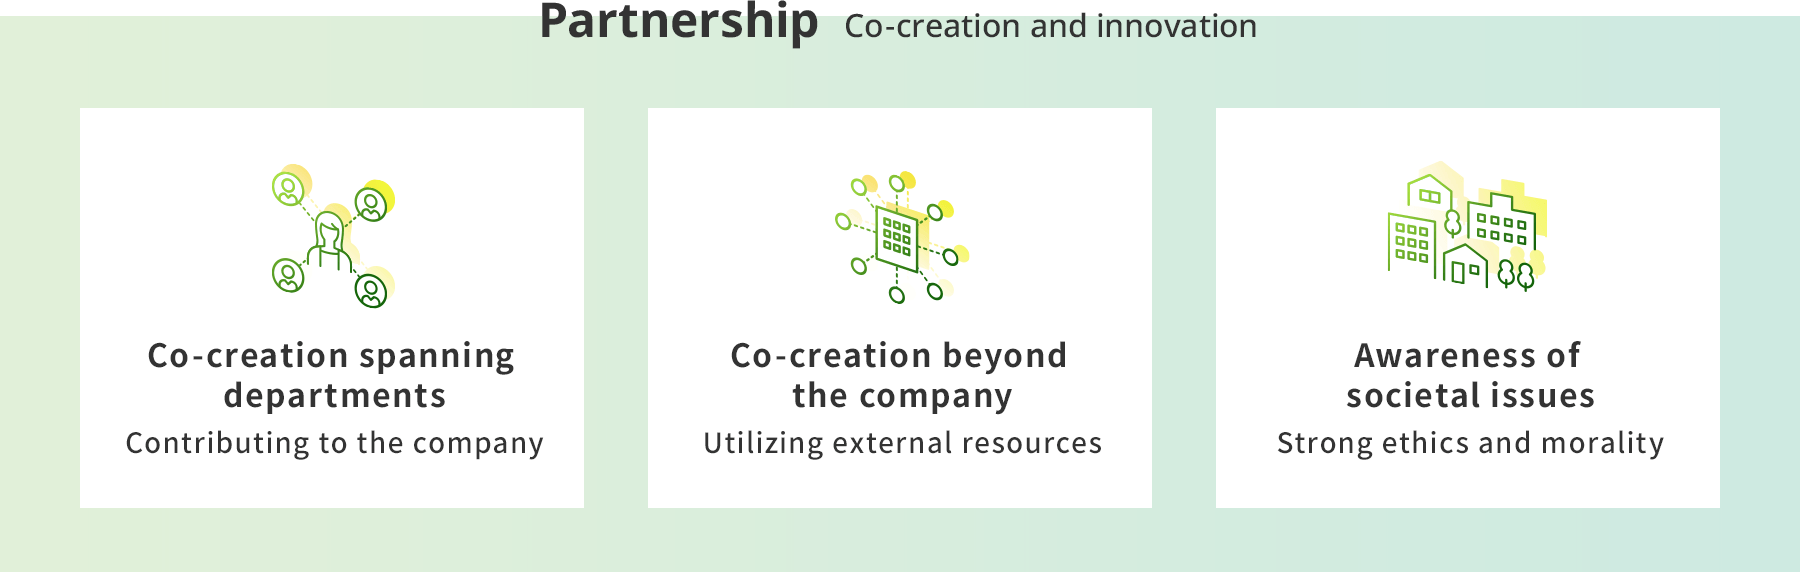 Partnership Co-creation and innovation Co-creation spanning departments Contributing to the company Co-creation beyond the company Utilizing external resources Awareness of societal issues Strong ethics and morality